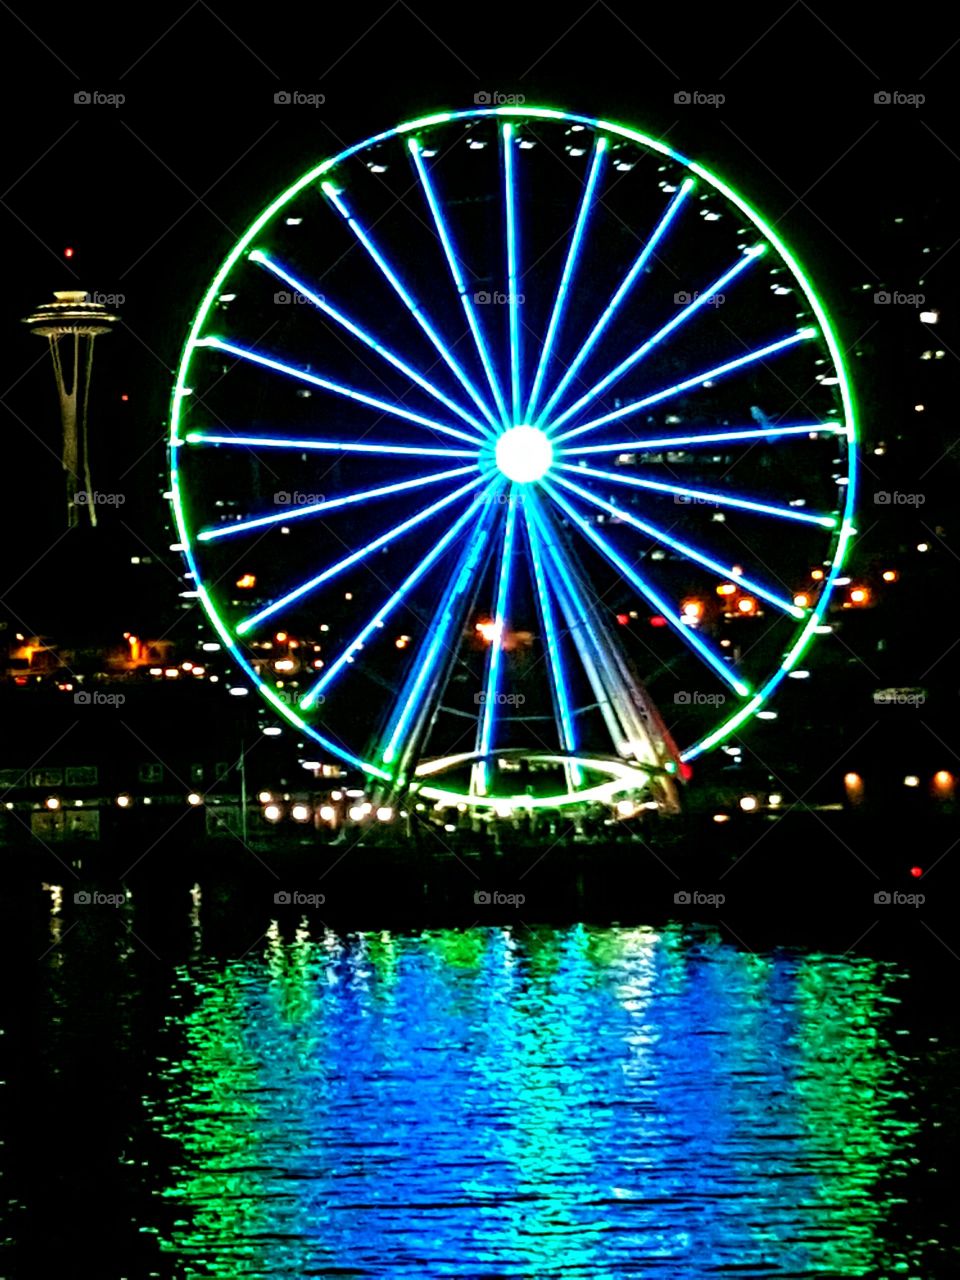 View of the Big Wheel from the Bremerton Ferry - displaying the Seahawks colors of blue and green.